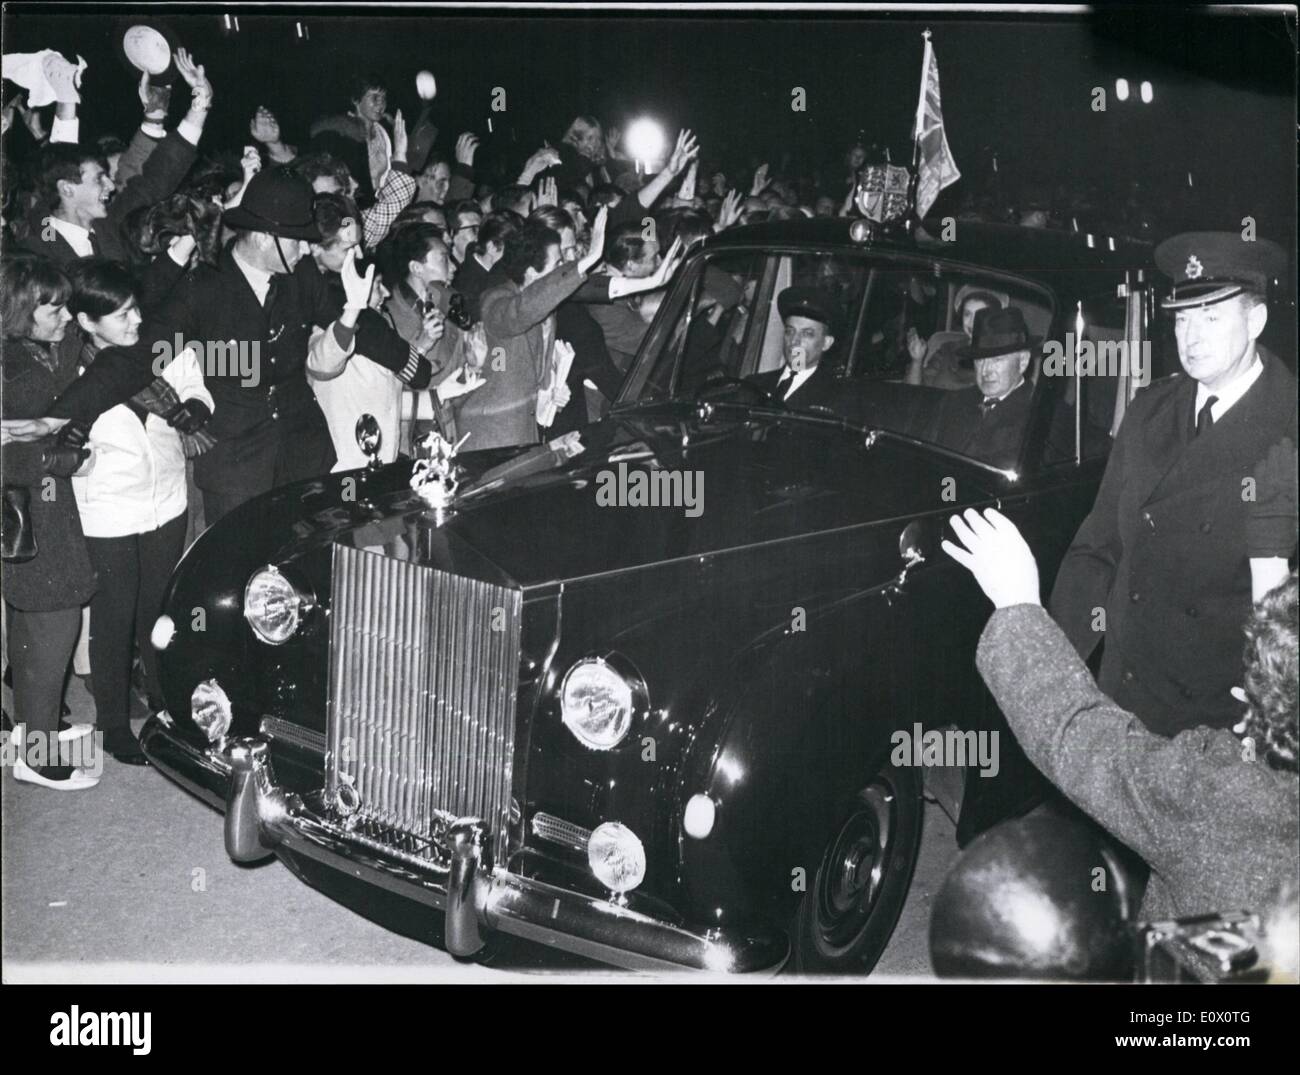 Oct. 10, 1964 - Crowds Cheer The Queen On Her Return From Canada: A large crowd gathered outside Buckingham Palace to welcome the Queen hoke from her visit to Canada last night. Photo shows Cheering crowds mob the Queen's car on arrival home at the Palace last night. Stock Photo